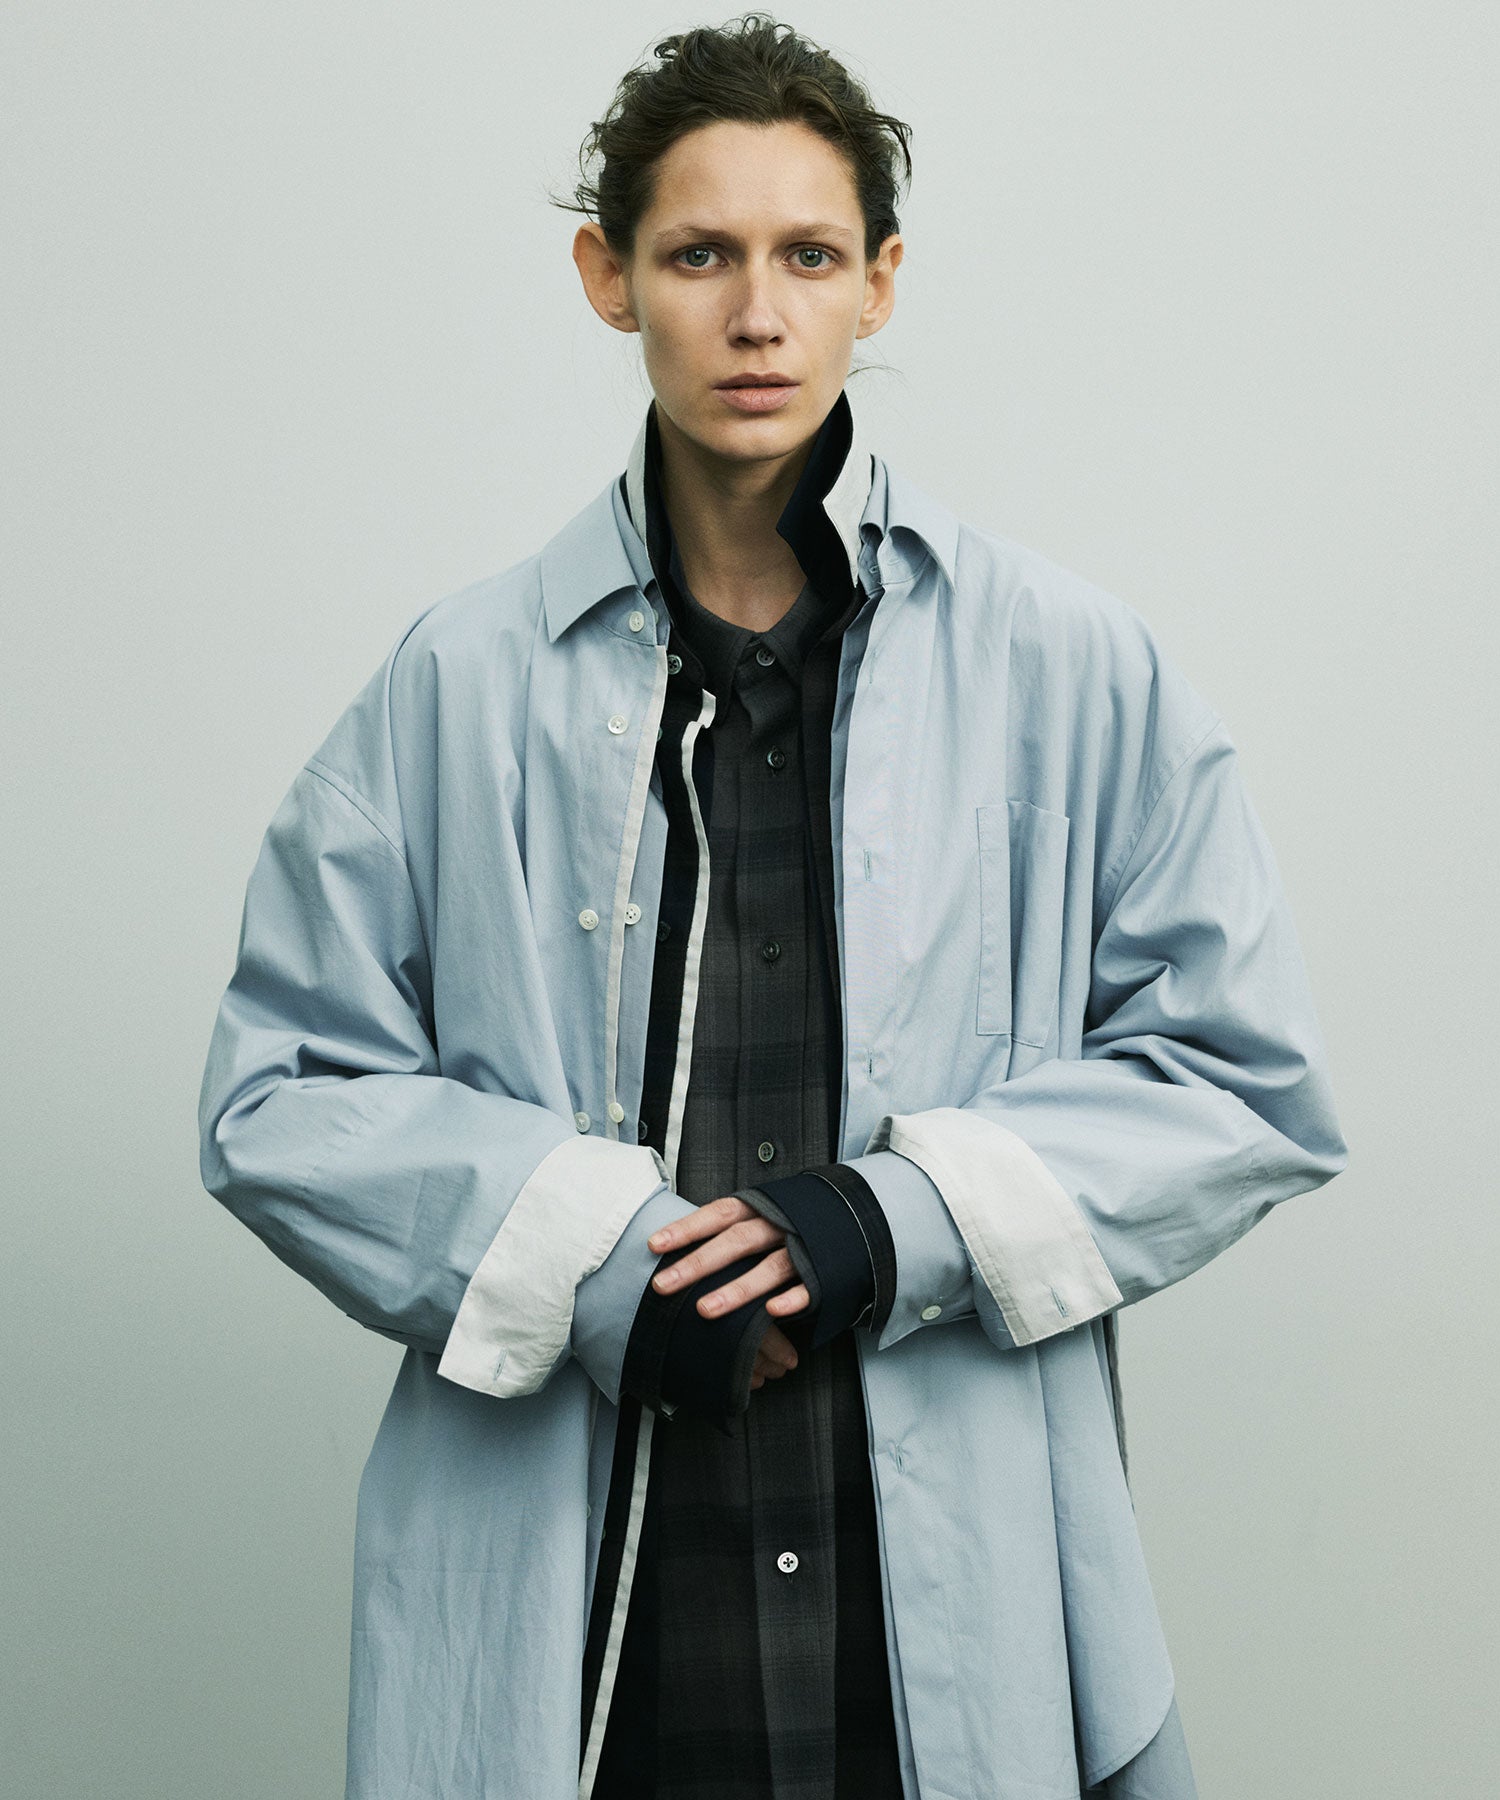 stein】OVERSIZED LAYERED SHIRT | 公式通販サイト session(セッション)